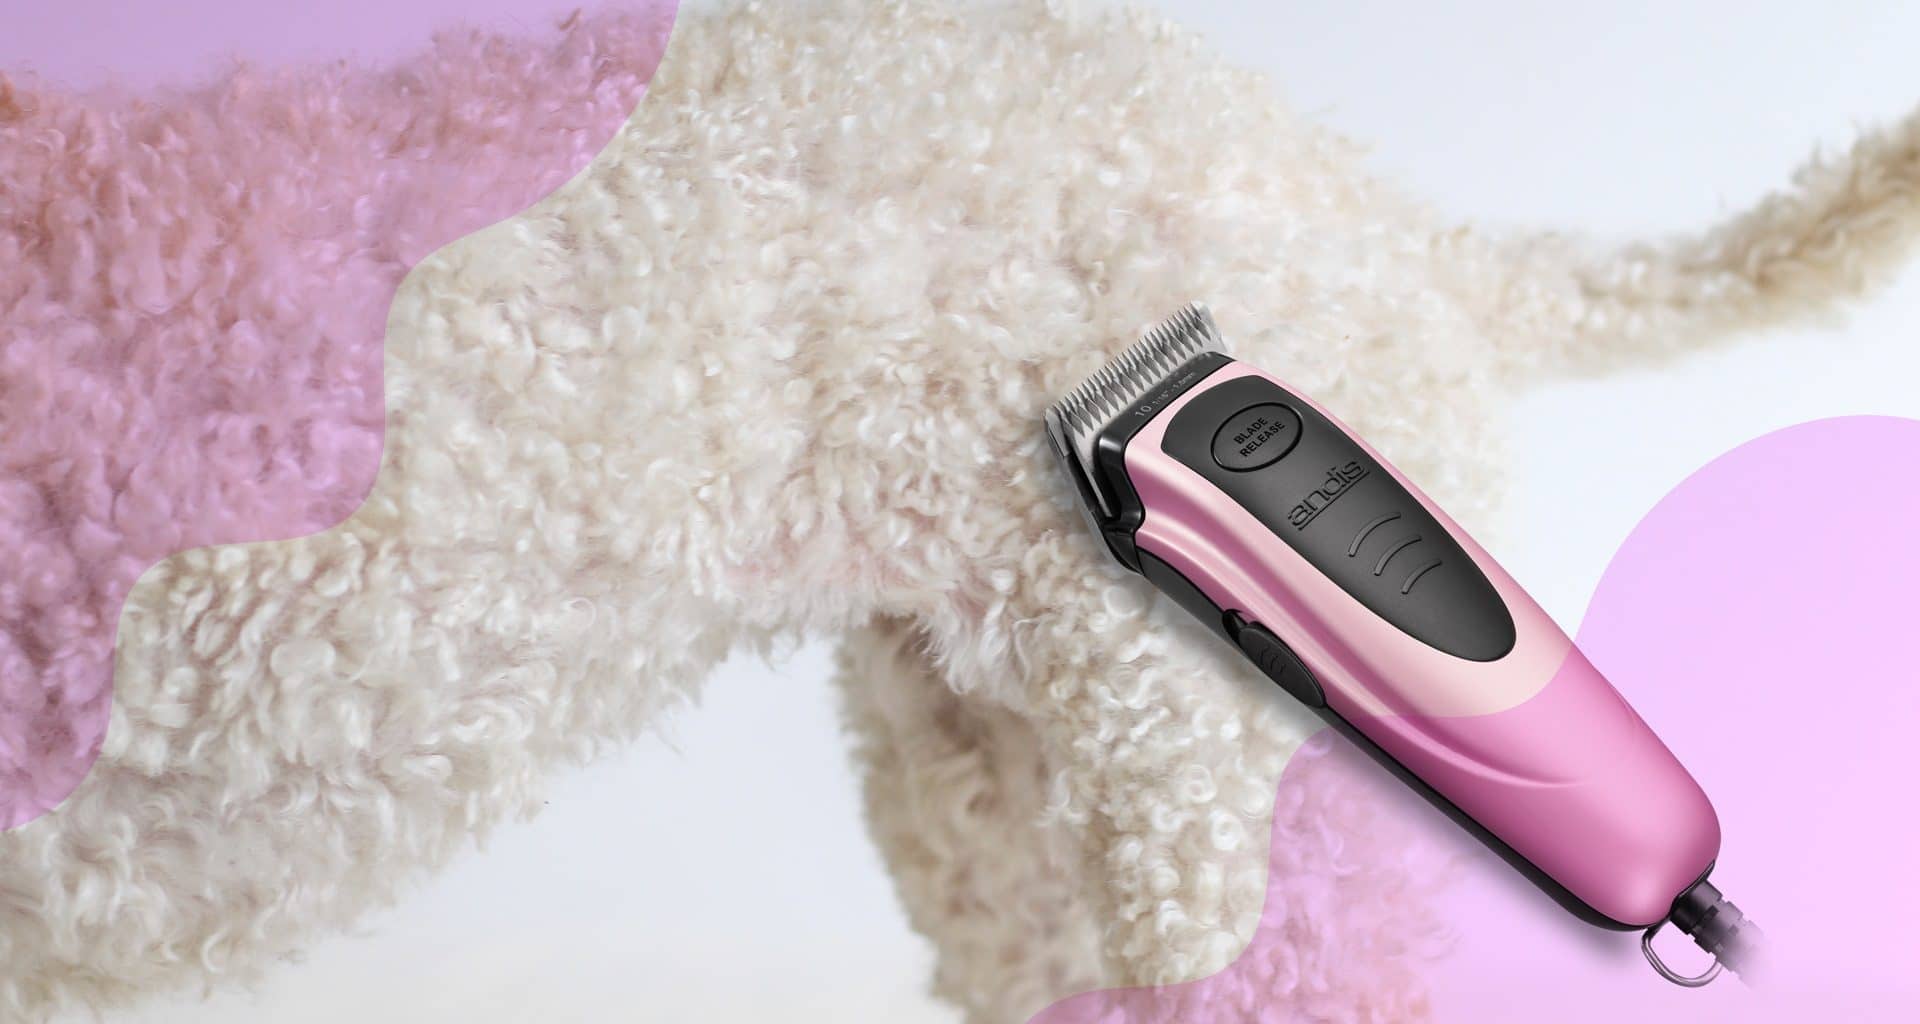 recommended dog grooming clippers